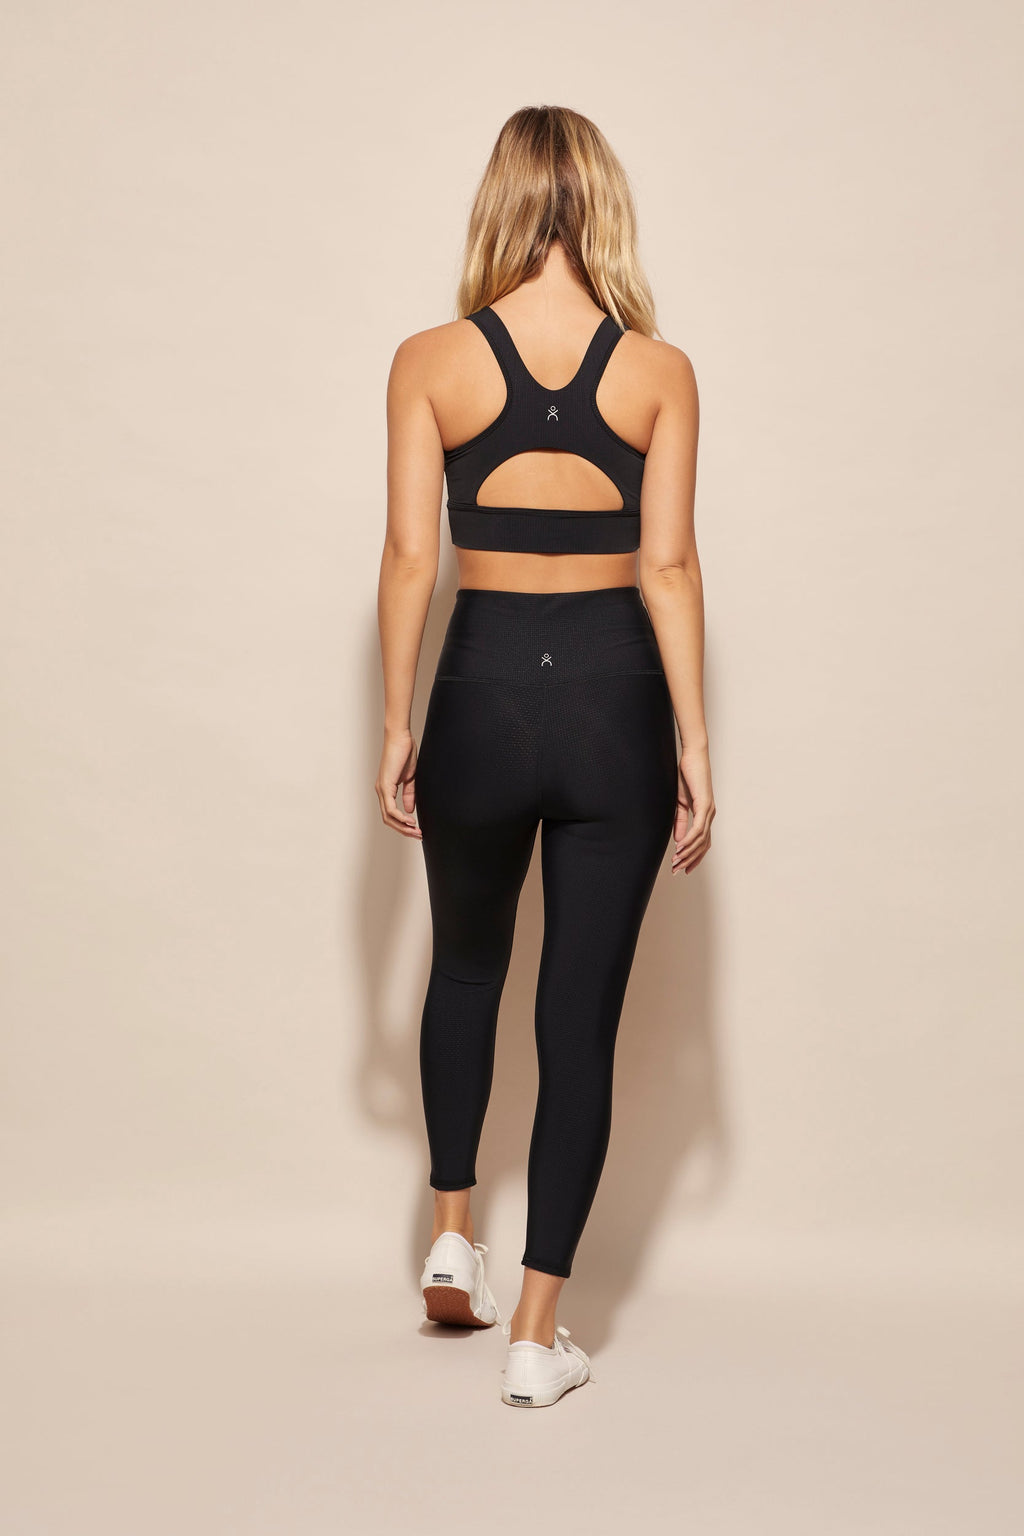 Matchpoint Tight | Textured Black Matchpoint Tight Tights Activewear ...